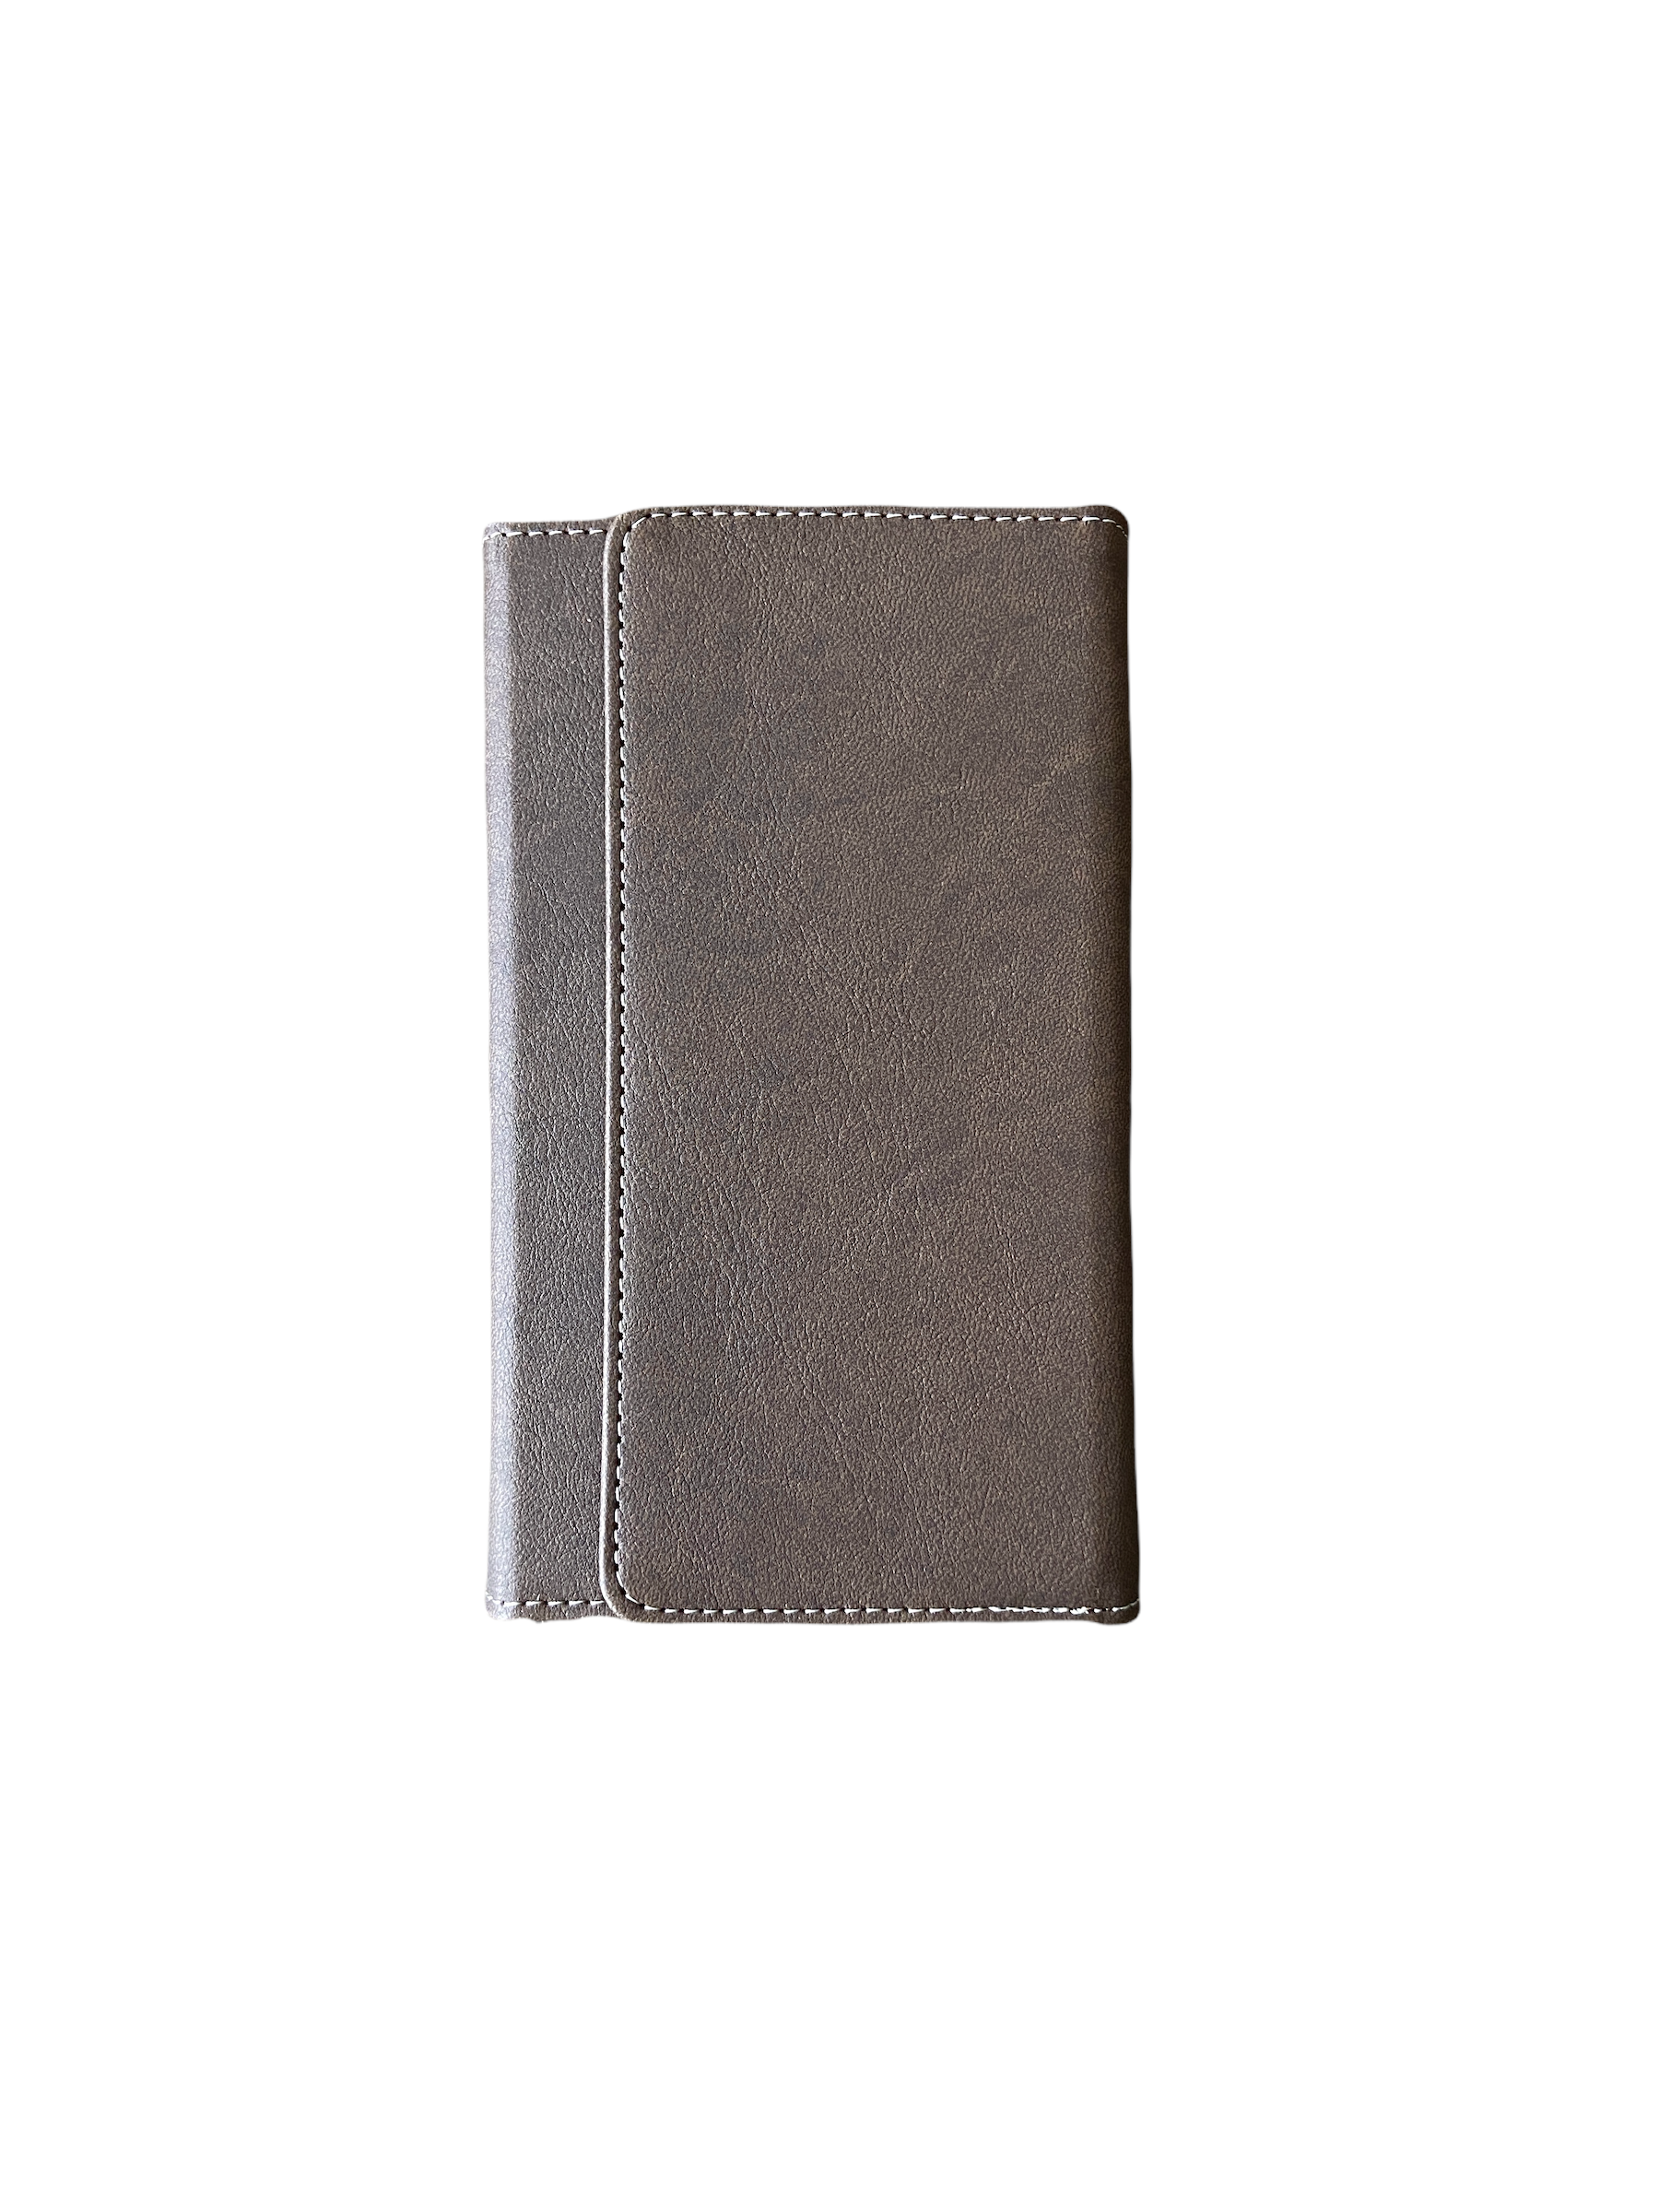 Personal Folio in brown, vegan leather, wallet and notebook in one